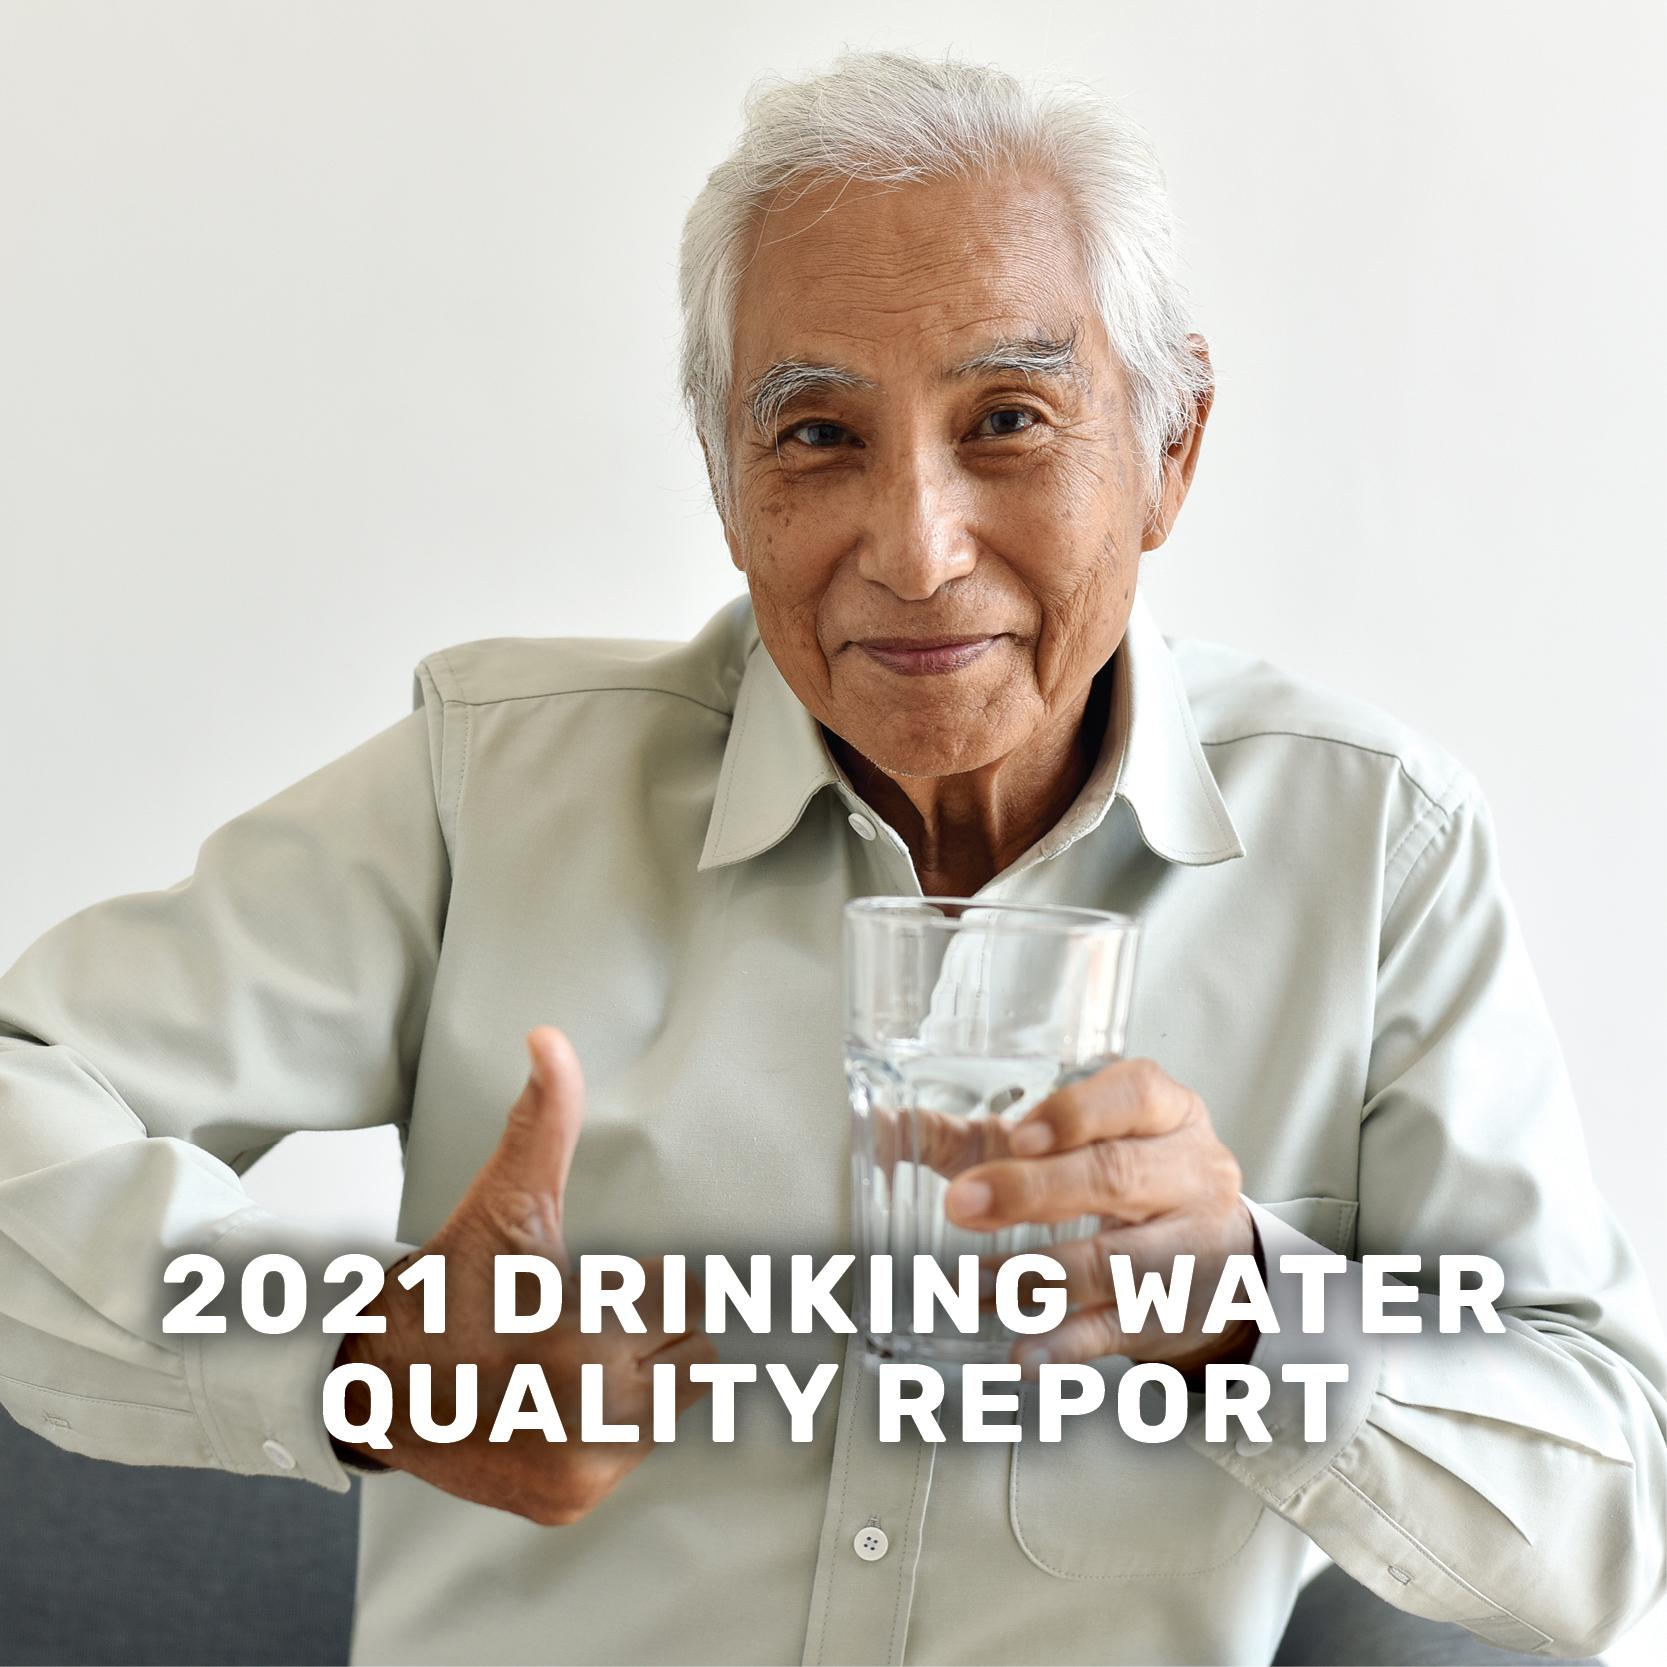 2021 drinking water quality report banner